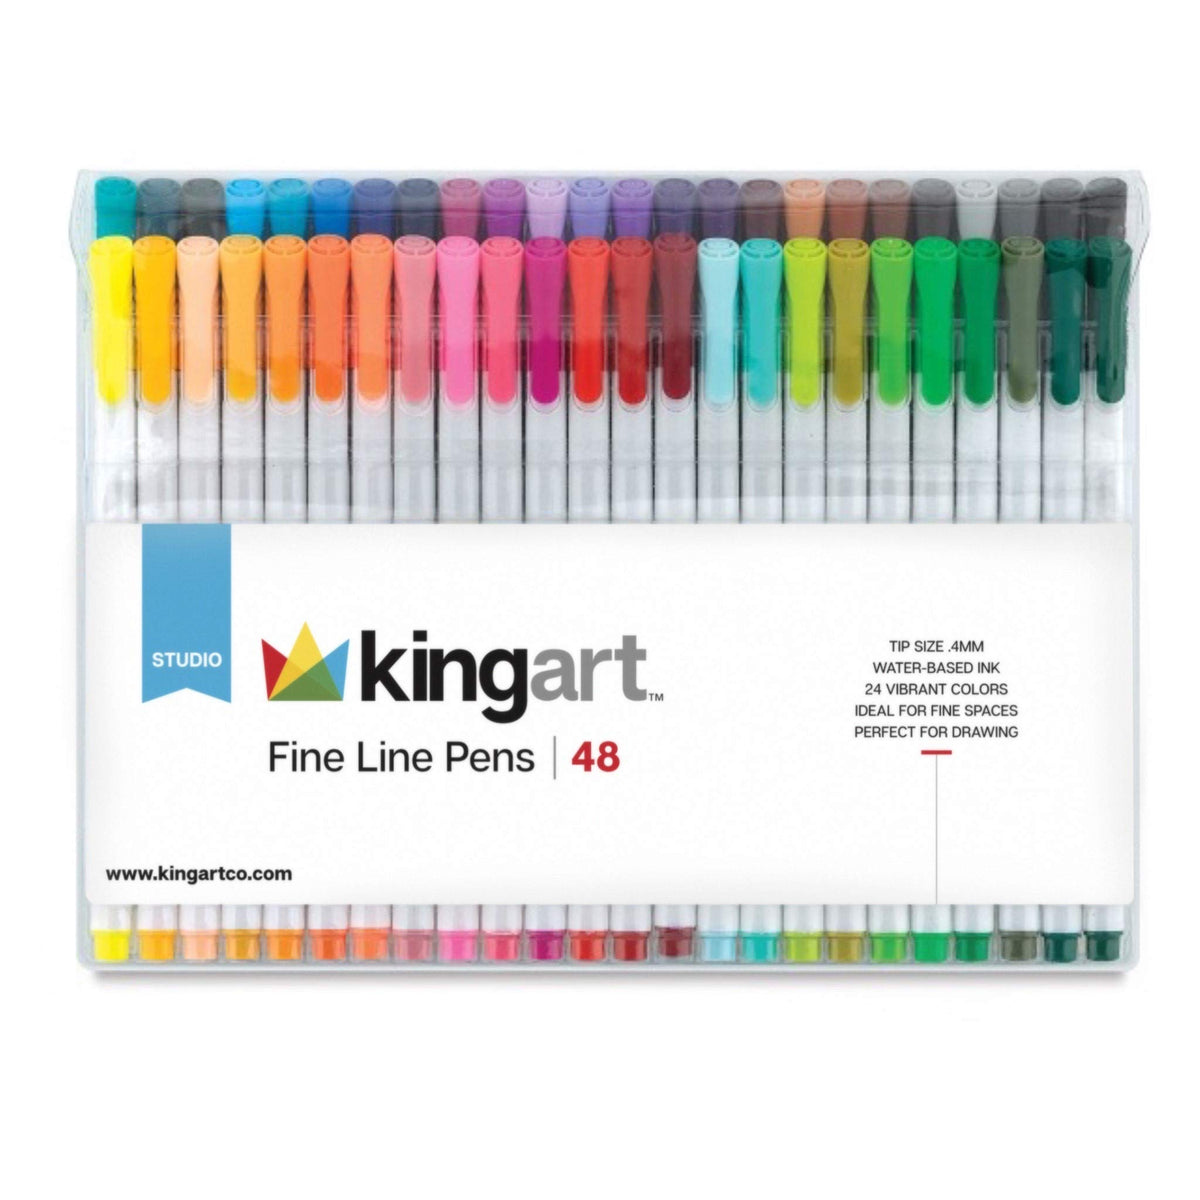 KINGART PRO Coloring Brush Pen Watercolor Markers, in 48 Vivid Colors with  Ink